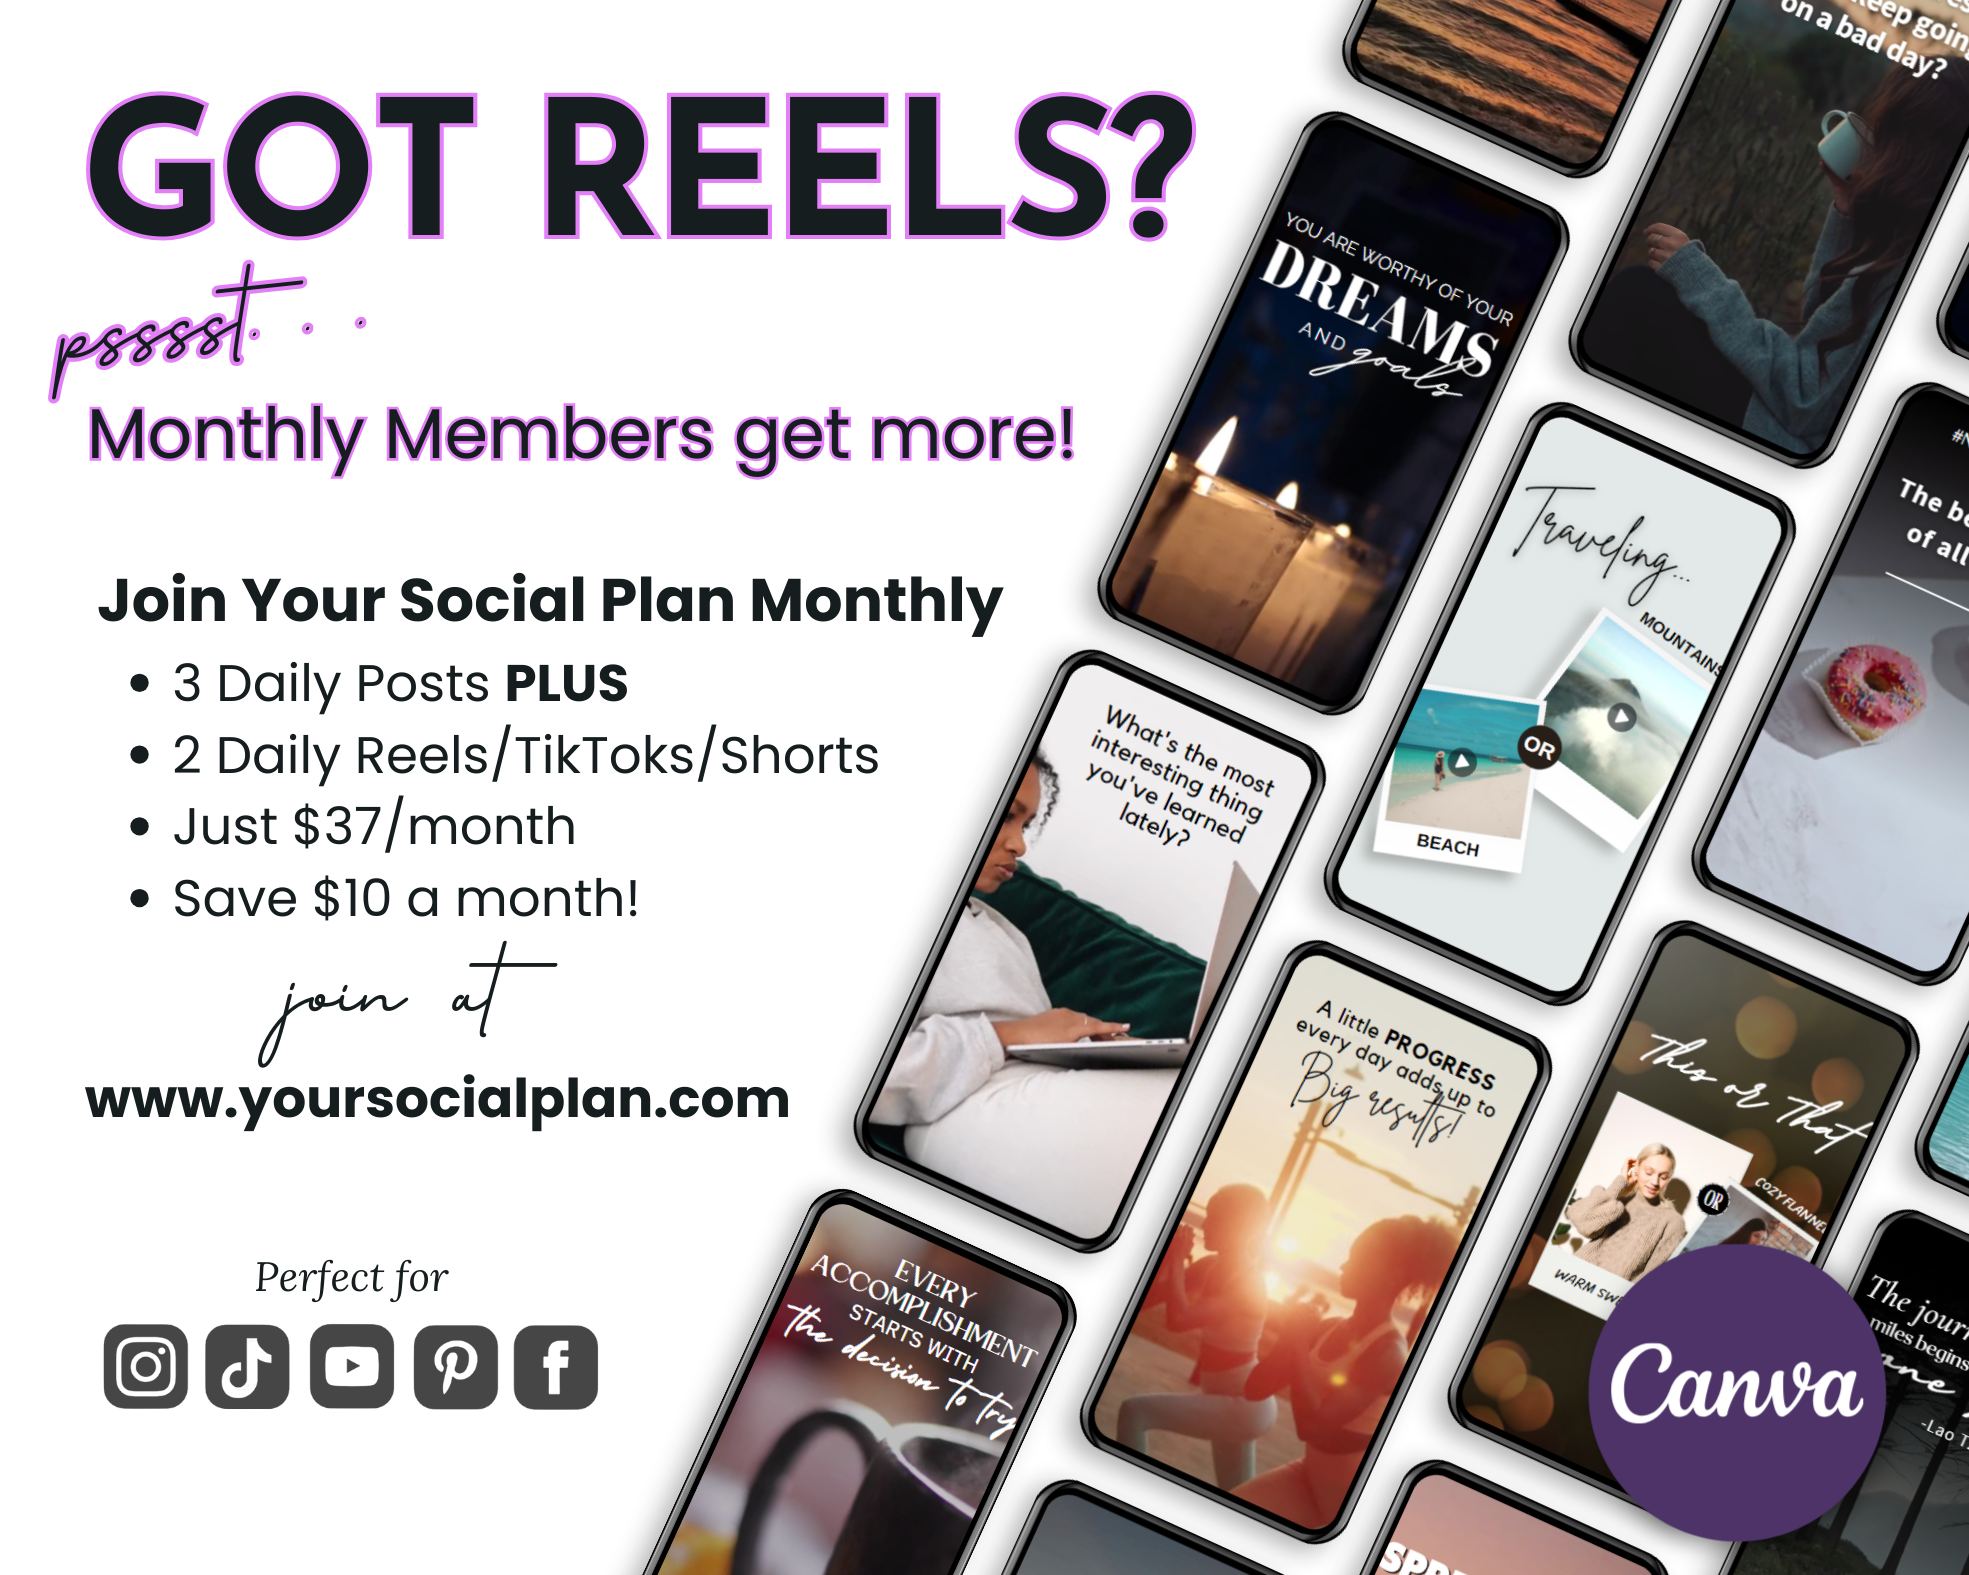 Promotional graphic for the April Daily Posting Plan by Get Socially Inclined, highlighting benefits for monthly members with a focus on reels and TikToks. Enhance your social media presence with our daily posting plan, tailored to boost